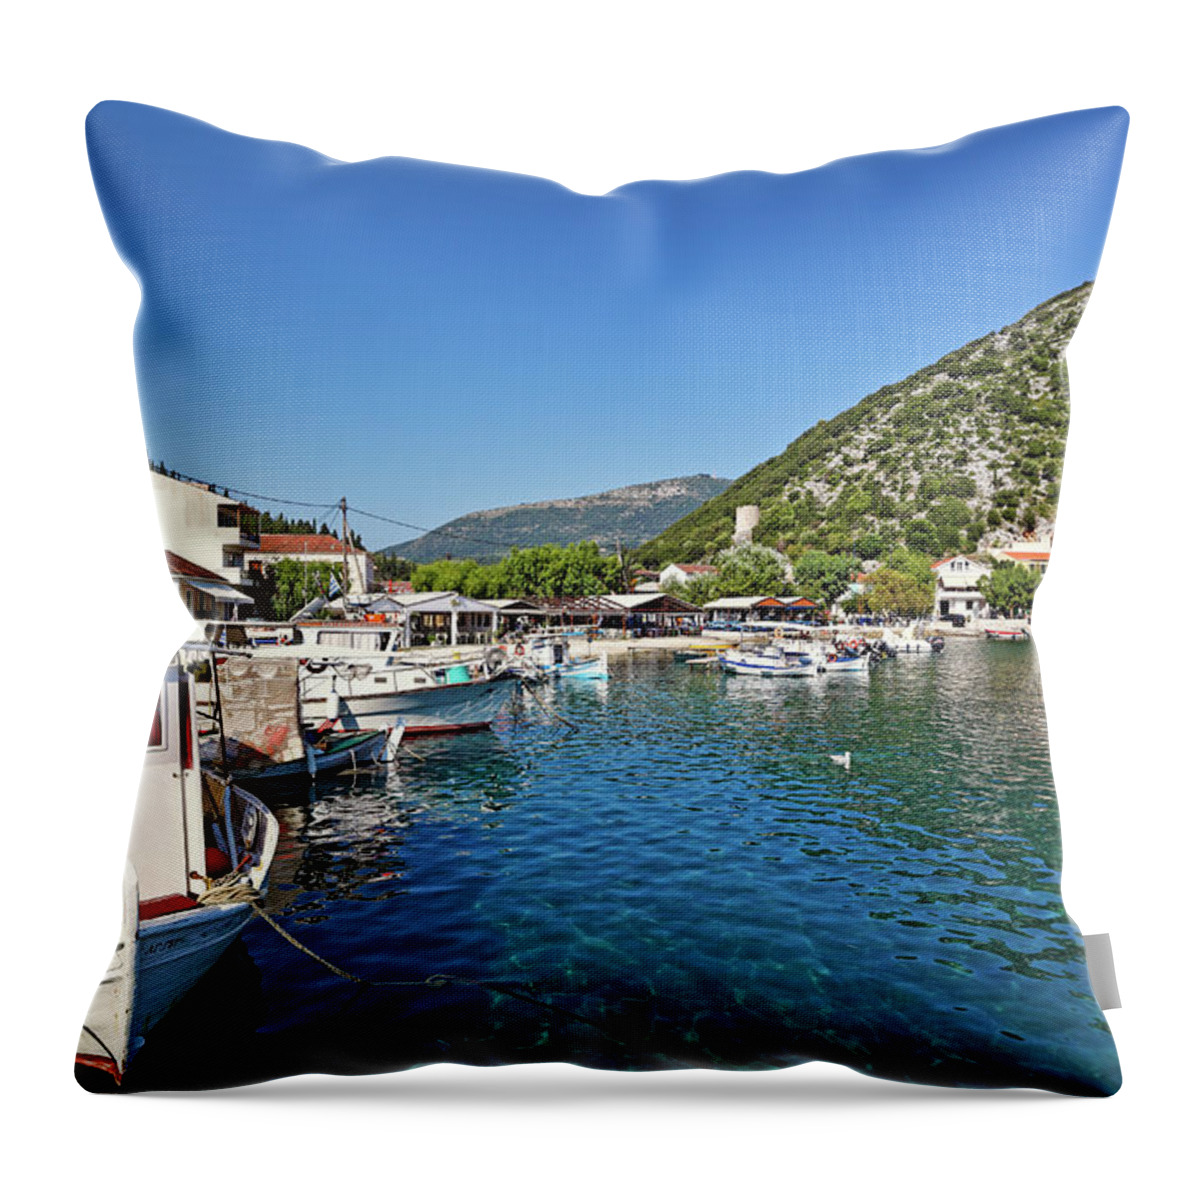 Frikes Throw Pillow featuring the photograph Frikes in Ithaki island, Greece by Constantinos Iliopoulos